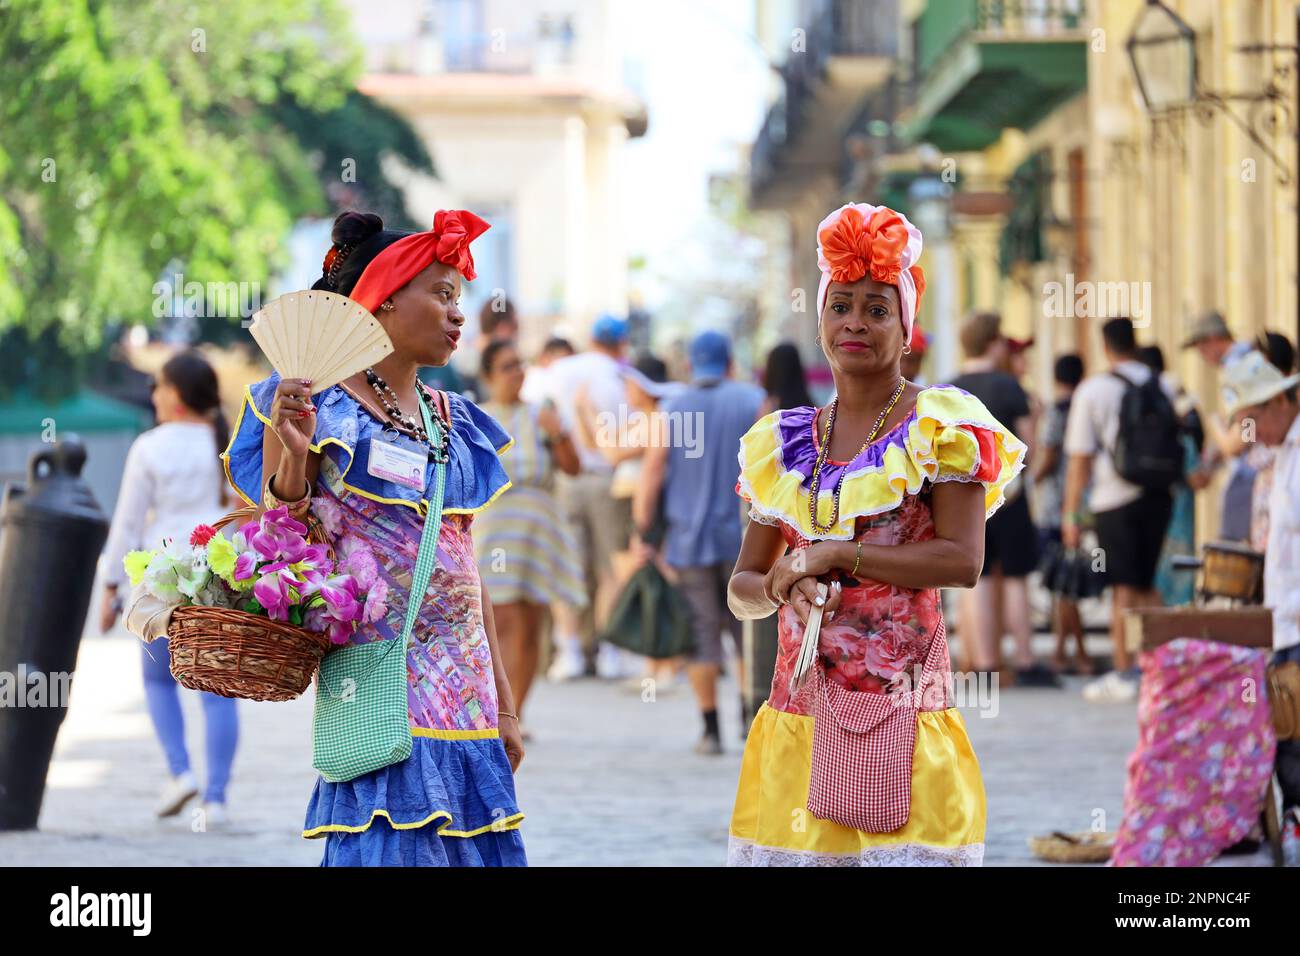 Cuban women in traditional clothing called 'Costumbrista' show the colonial times on Old Havana street on crowd of people background Stock Photo